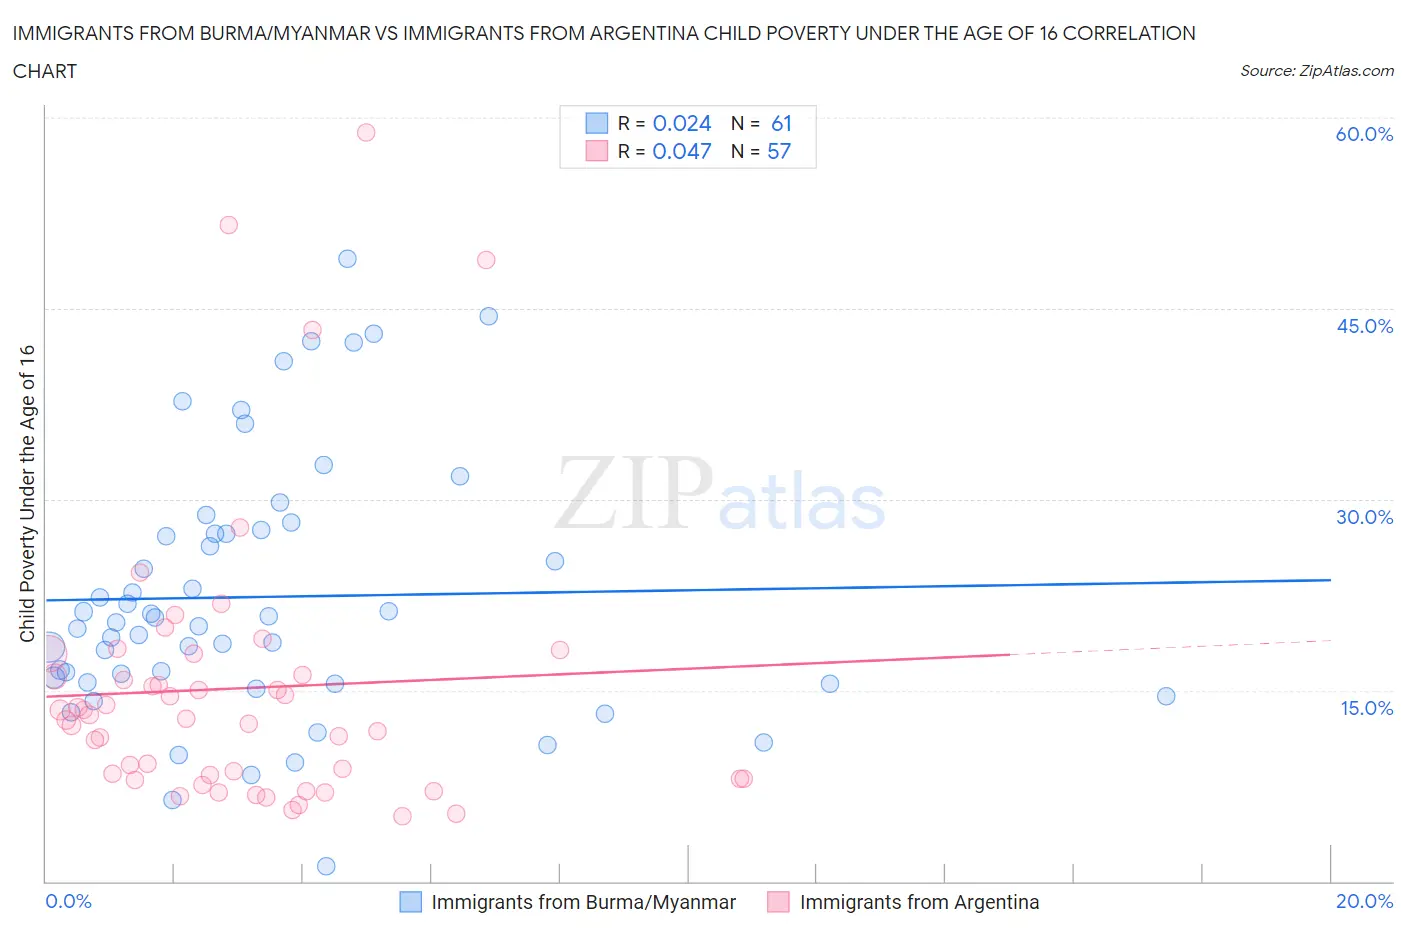 Immigrants from Burma/Myanmar vs Immigrants from Argentina Child Poverty Under the Age of 16